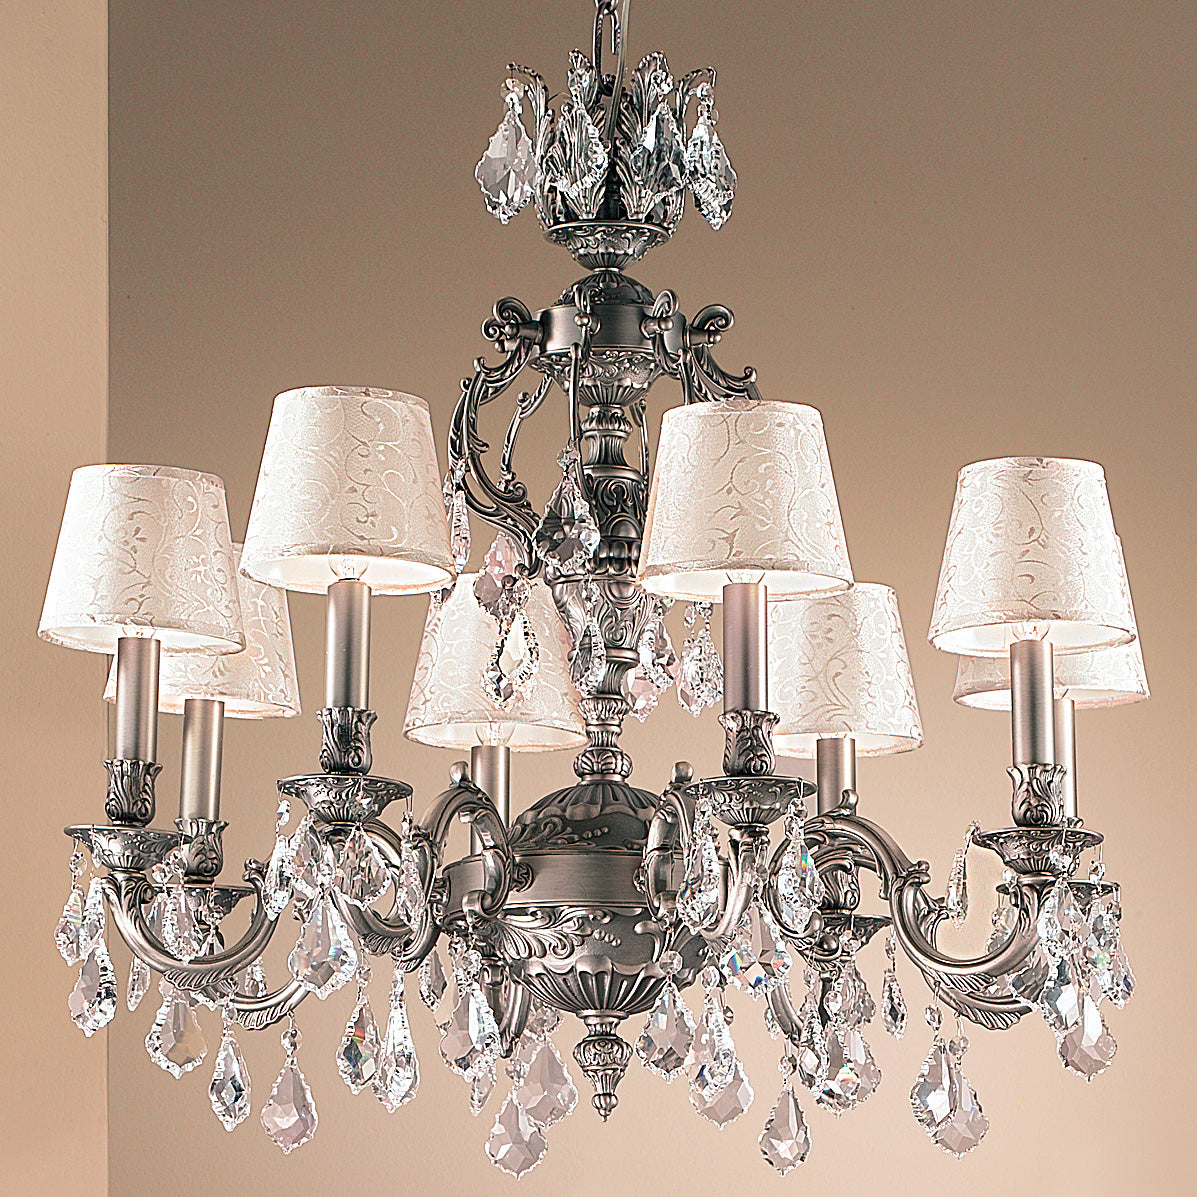 Classic Lighting 57378 FG CGT Chateau Crystal Chandelier in French Gold (Imported from Spain)